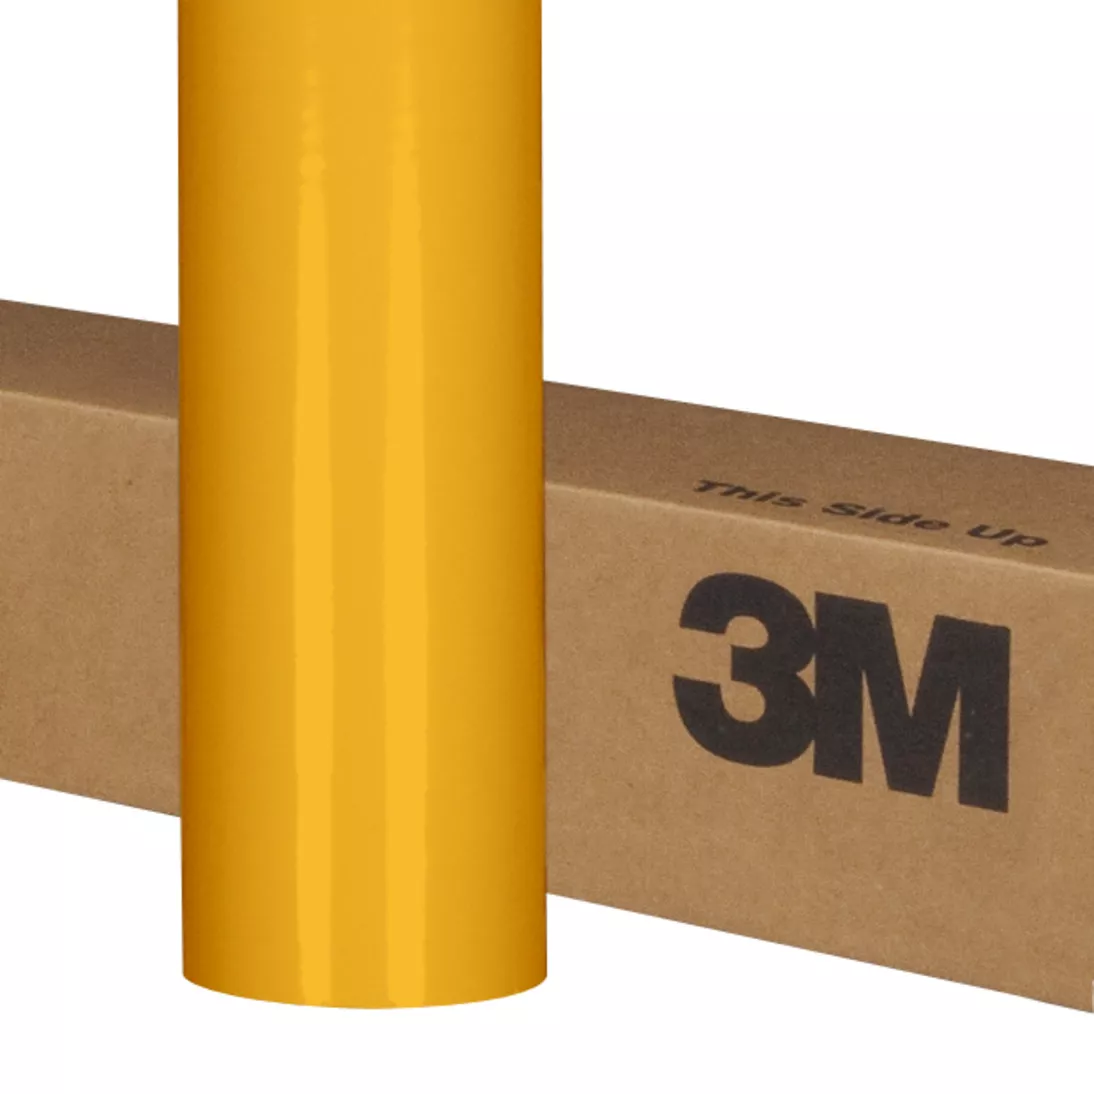 3M™ Controltac™ Graphic Film with Comply™ Adhesive 180mC-64, Apricot, 48
in x 50 yd, 1 Roll/Case